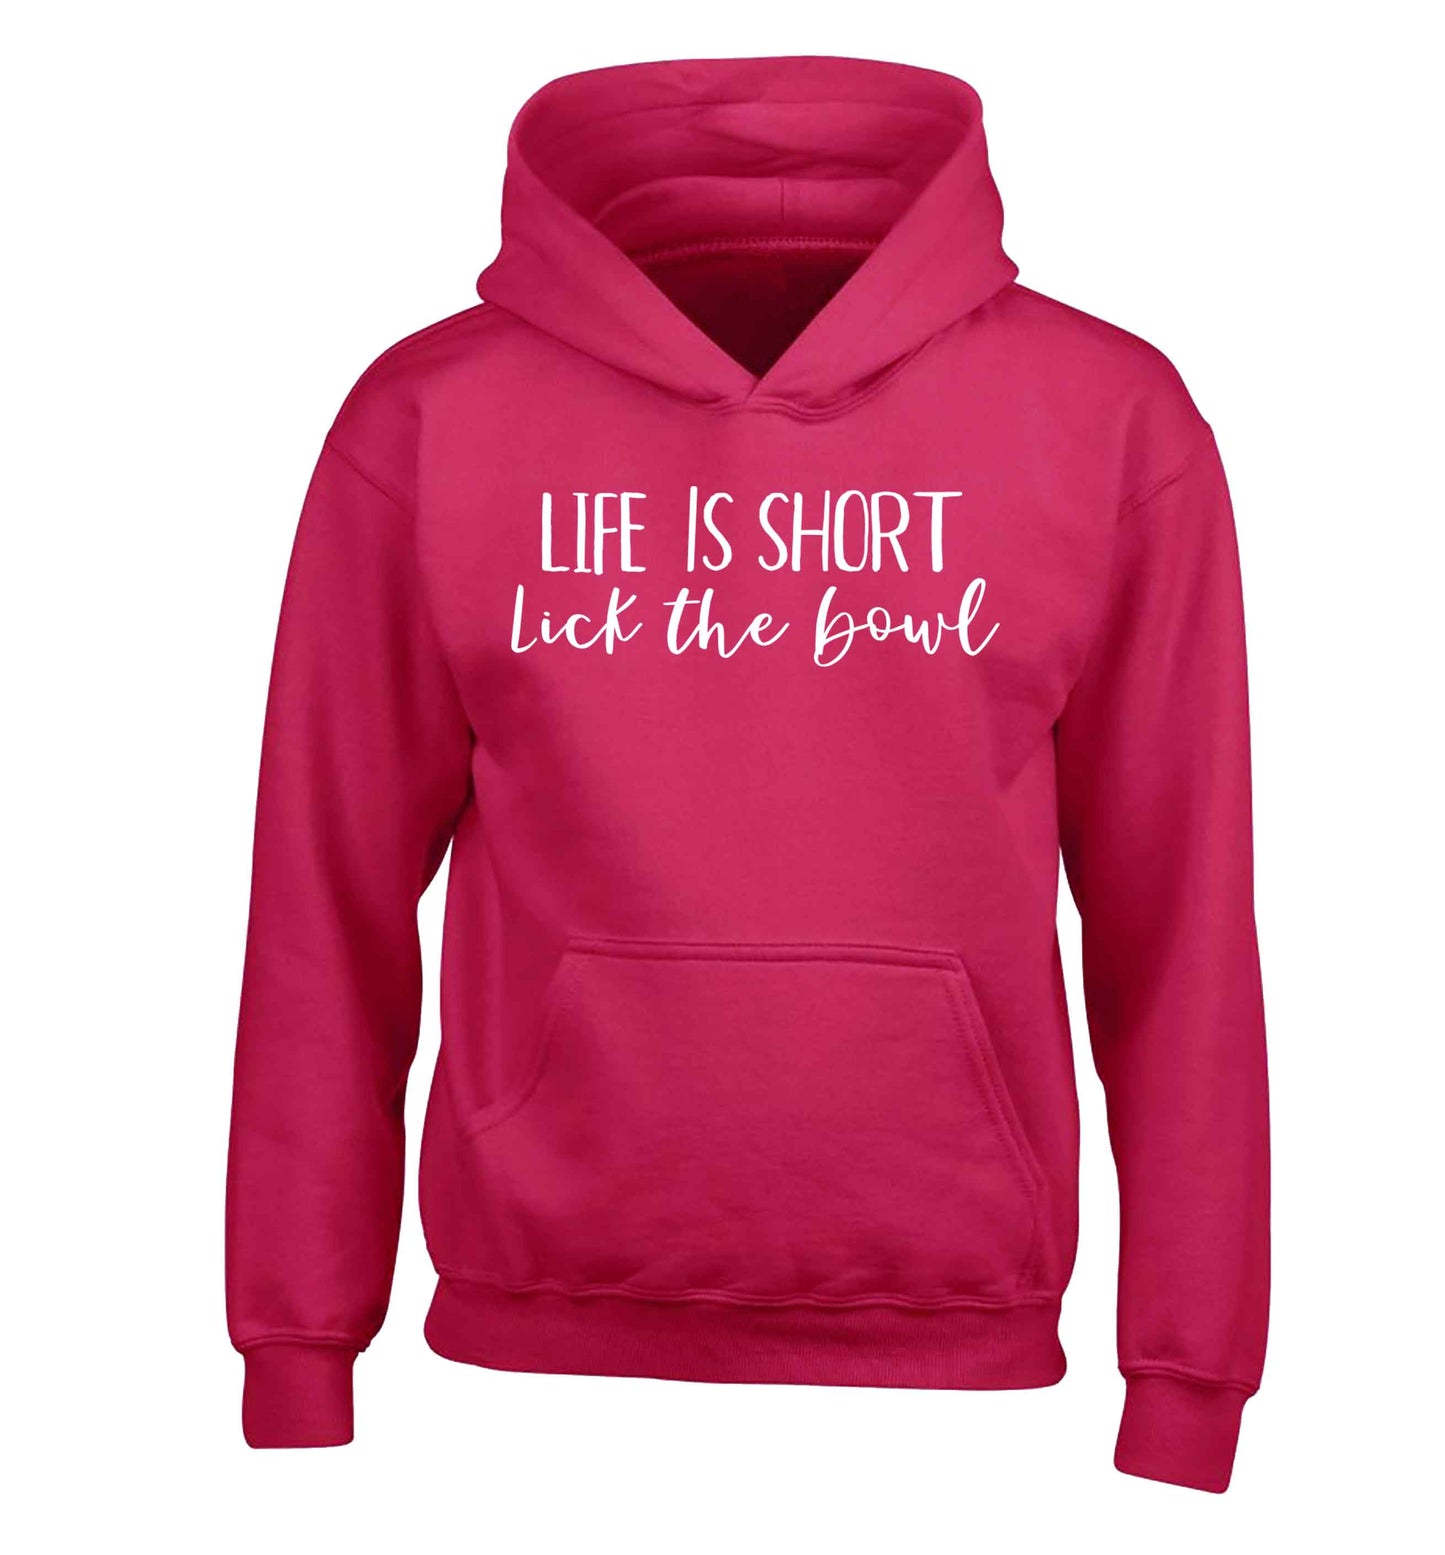 Life is short lick the bowl children's pink hoodie 12-13 Years